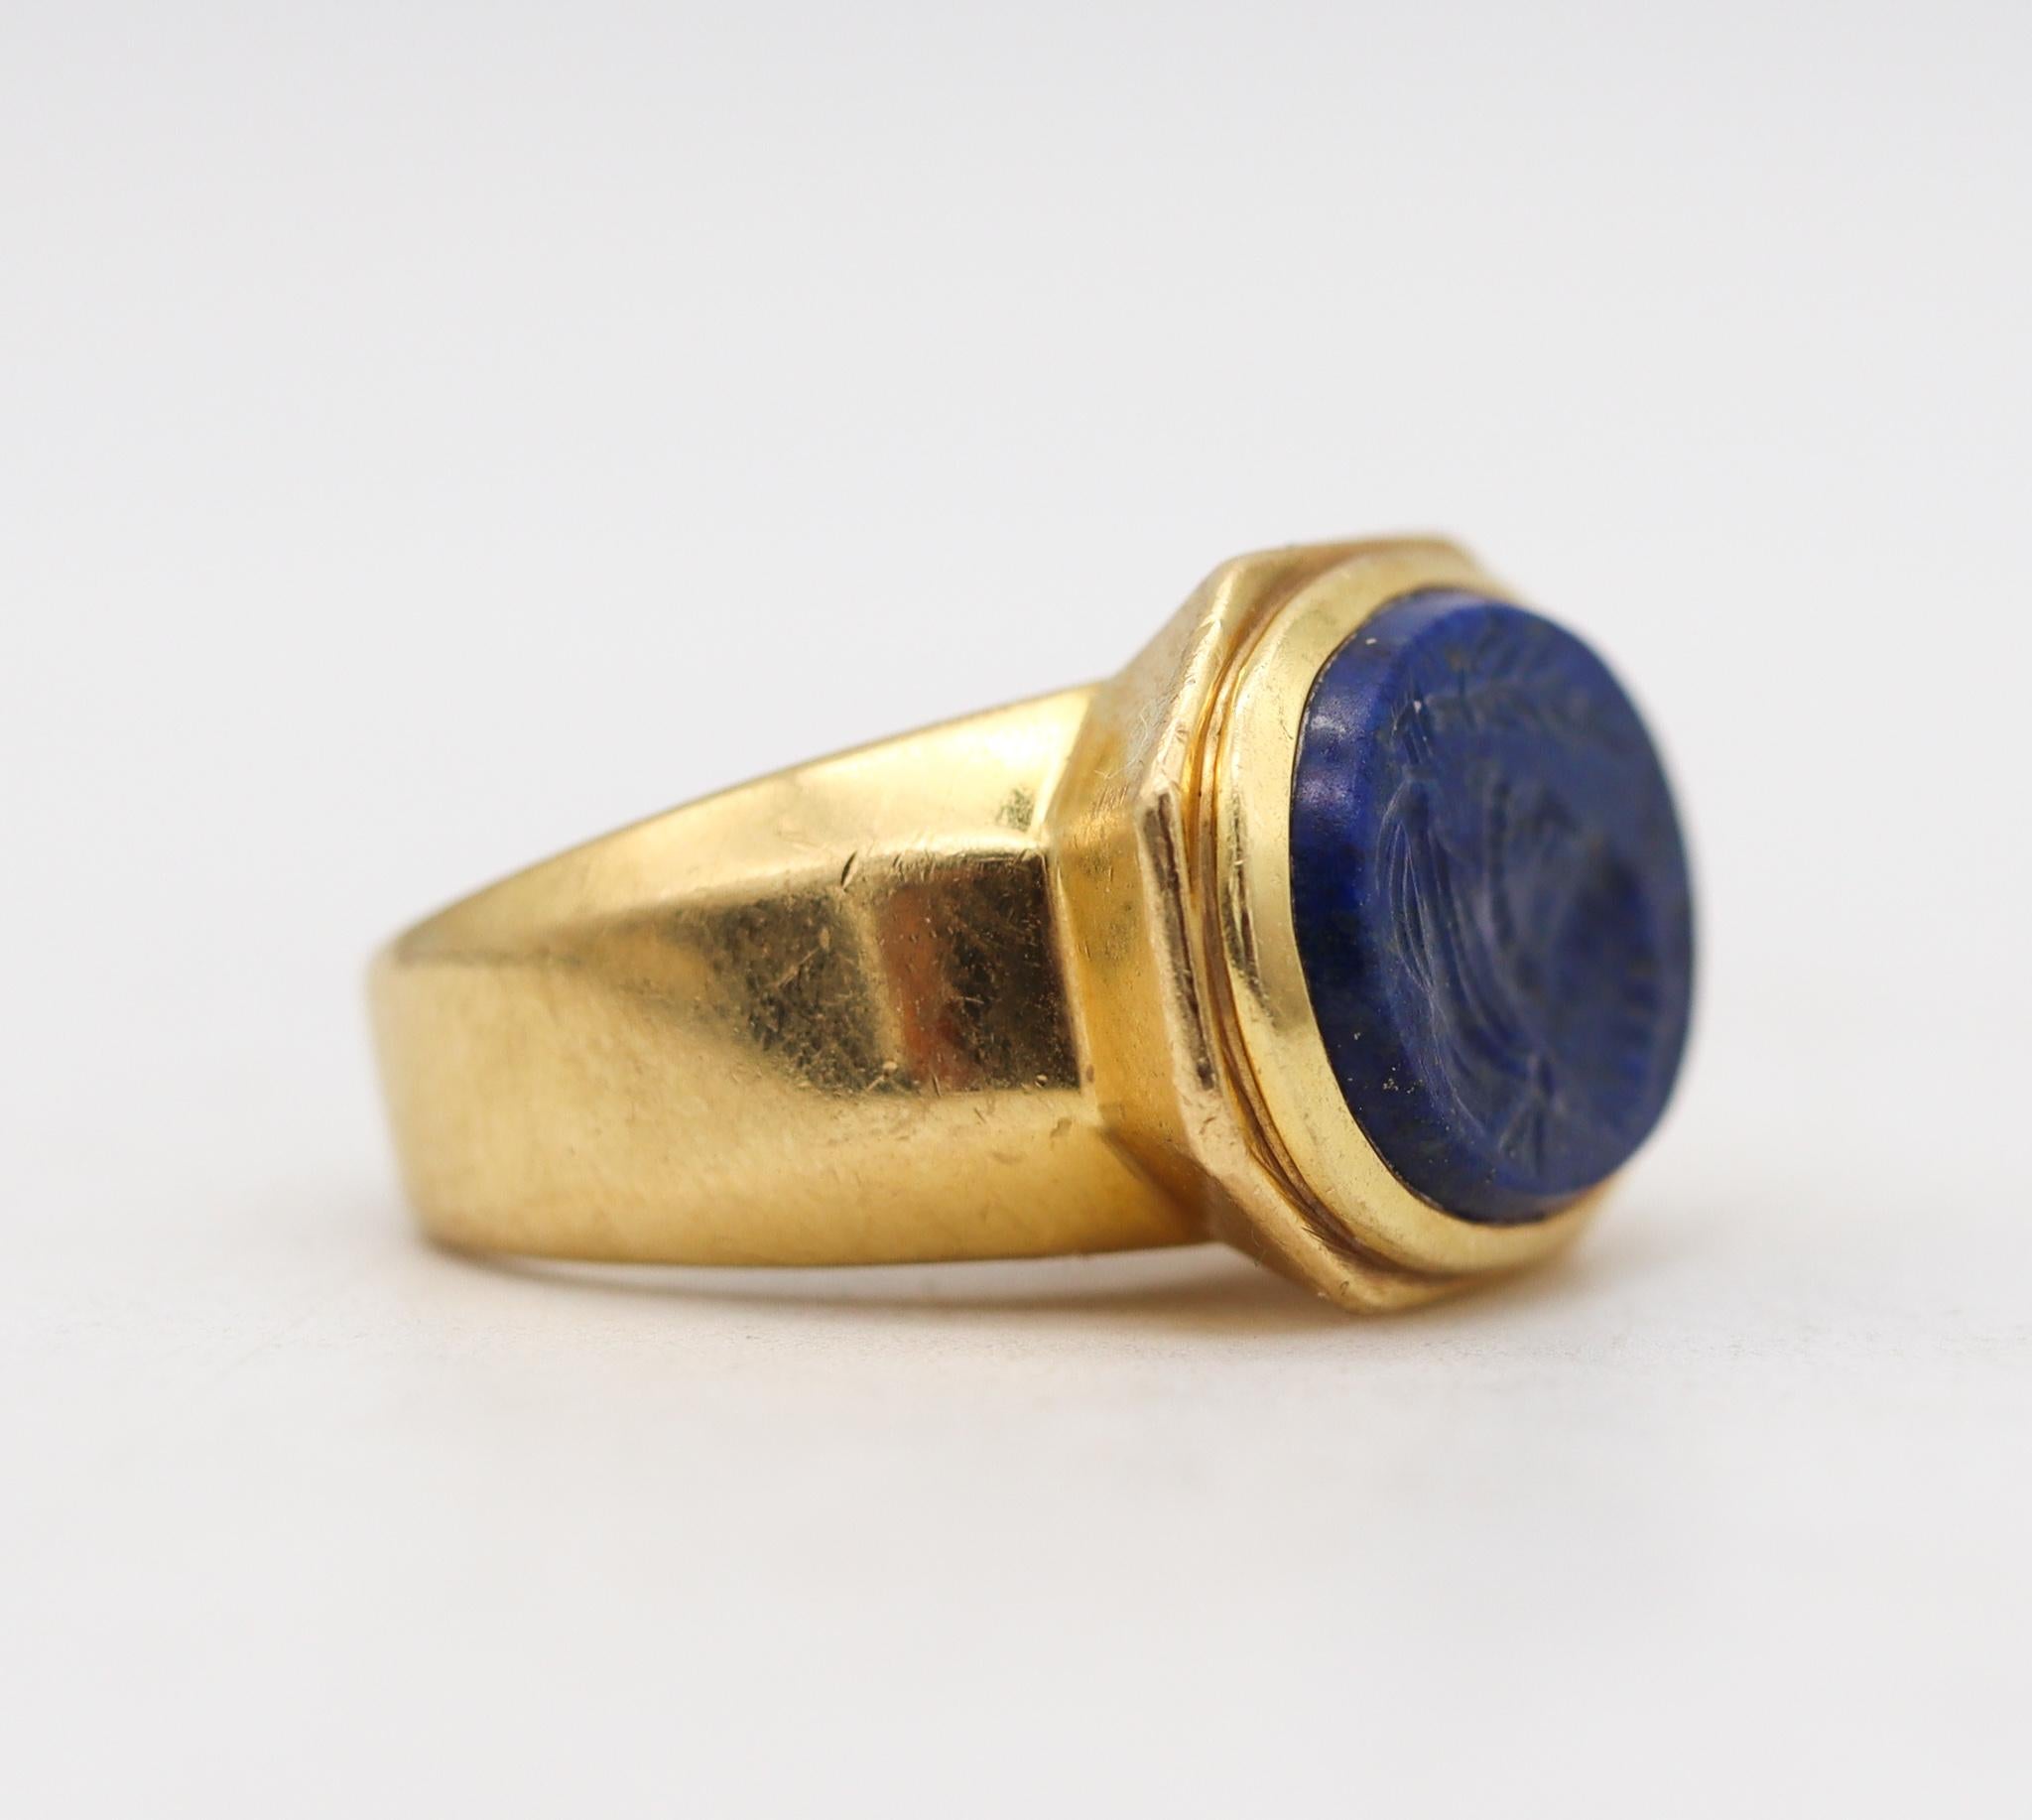 Mixed Cut Signet Ring Revival Intaglio in Solid 18kt Yellow Gold with Carved Lapis Lazuli